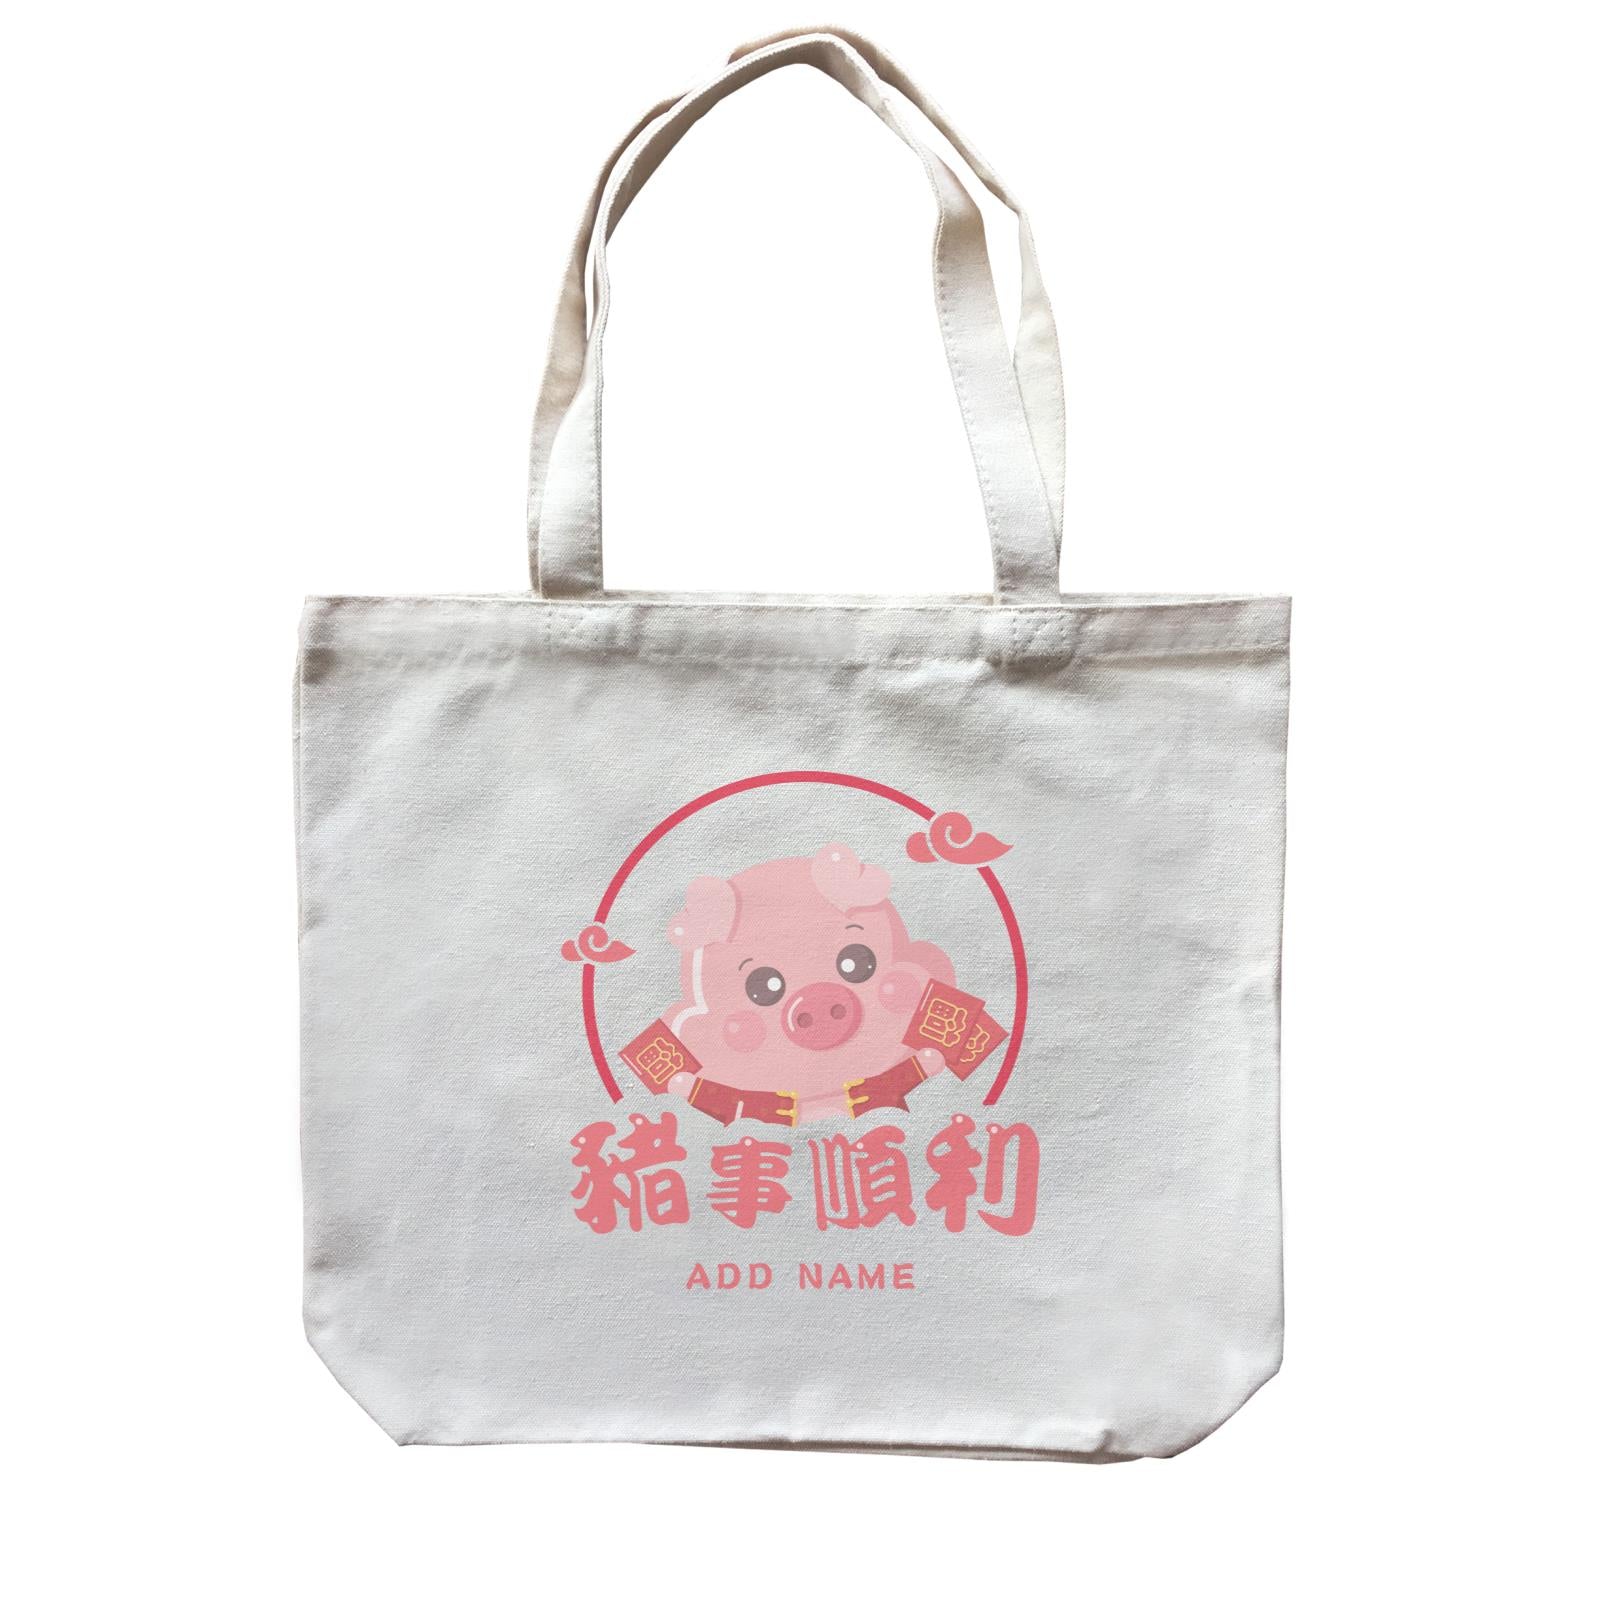 Chinese New Year Cute Pig Emblem Boy Accessories With Addname Canvas Bag